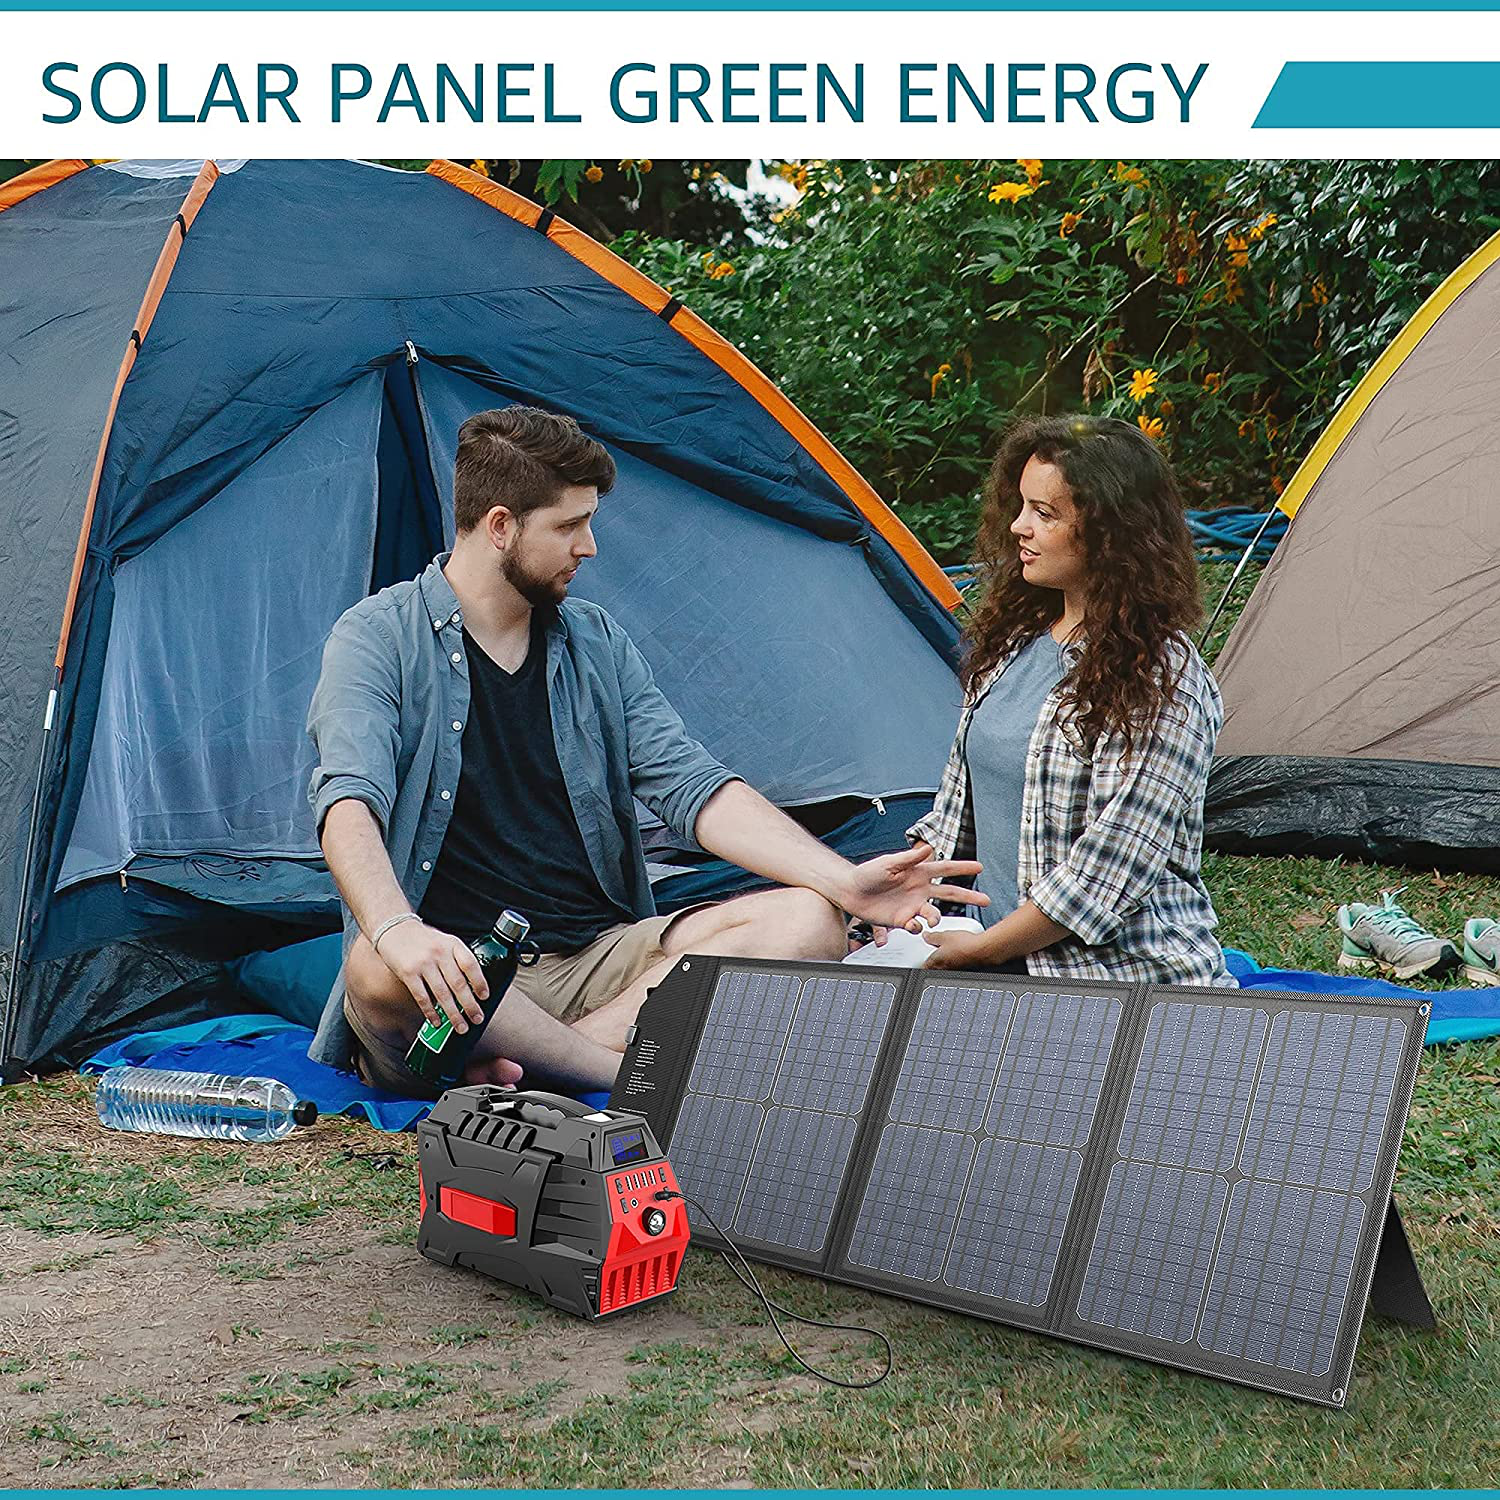 296Wh Portable Power Station with 60W Solar Panel, Solar Generator Outdoor Backup Battery Supply with AC Outlet for Camping, Home Emergency, Traveling, RV Trip